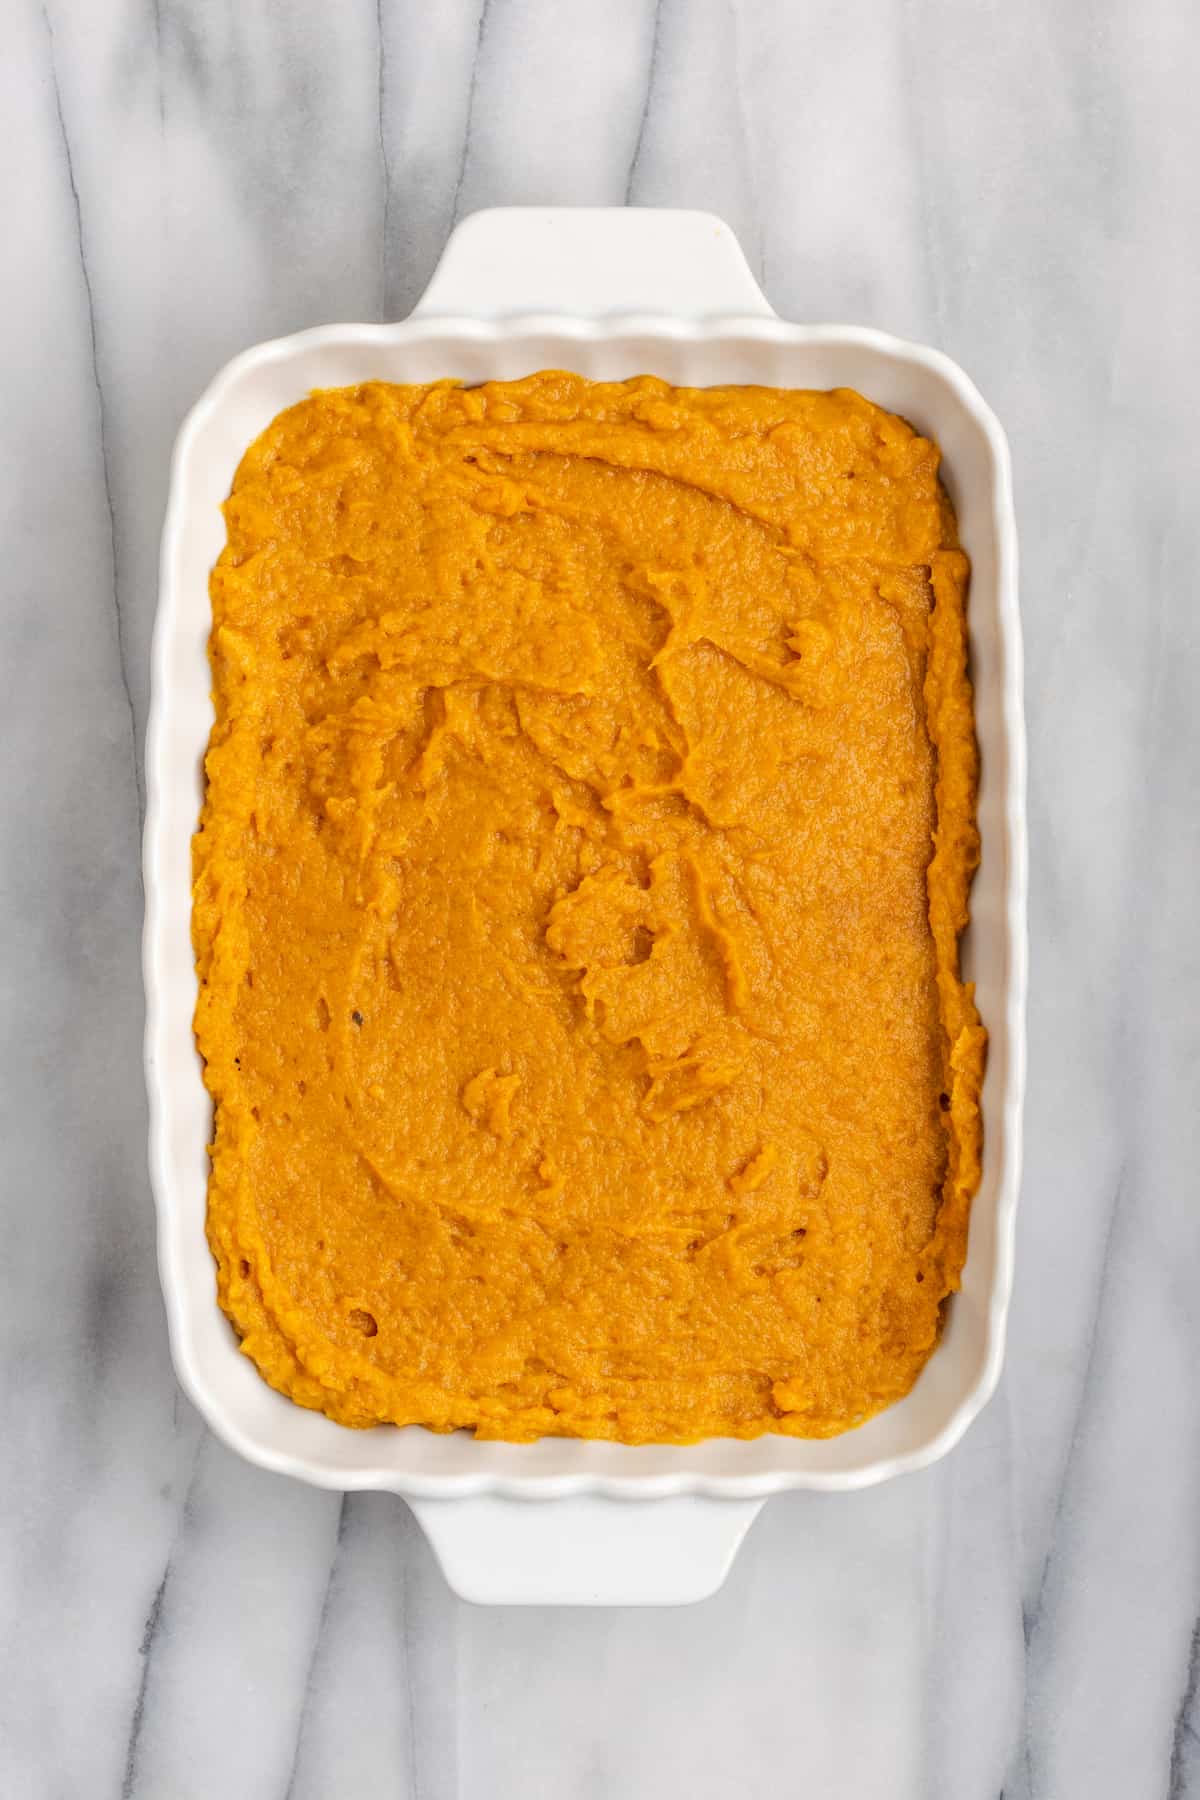 Overhead view of uncooked sweet potato soufflé in a casserole dish